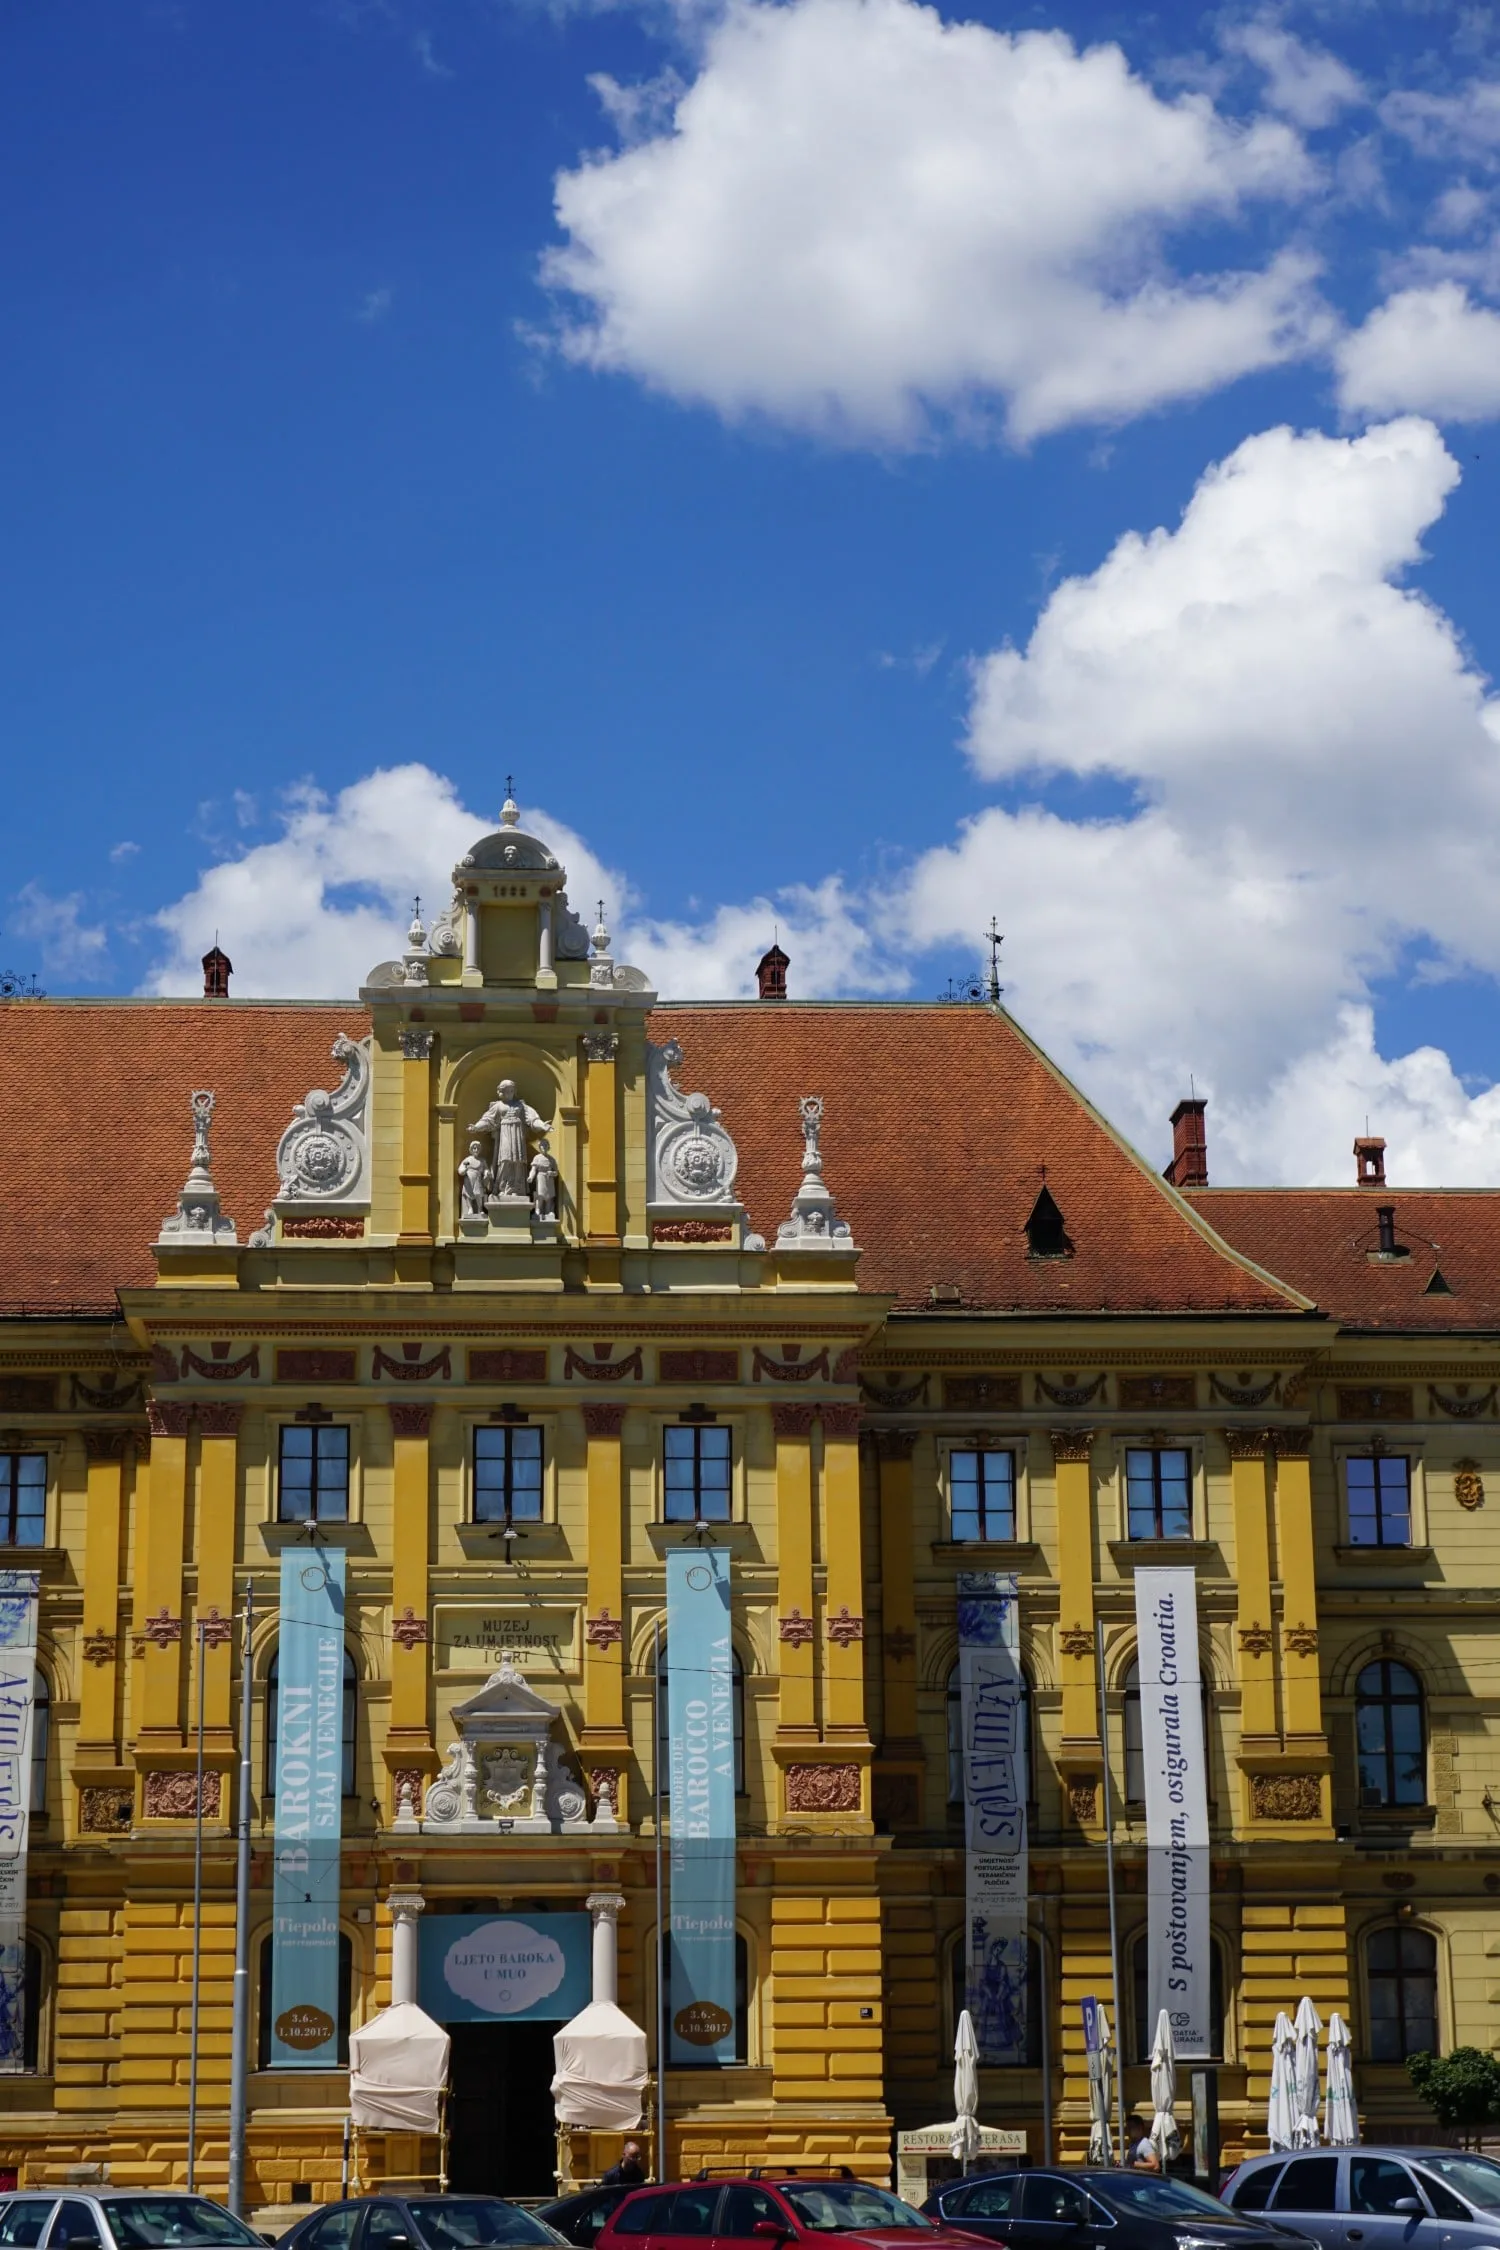 Awesome Reasons to Go to Zagreb - More Colourful Architecture. read more.